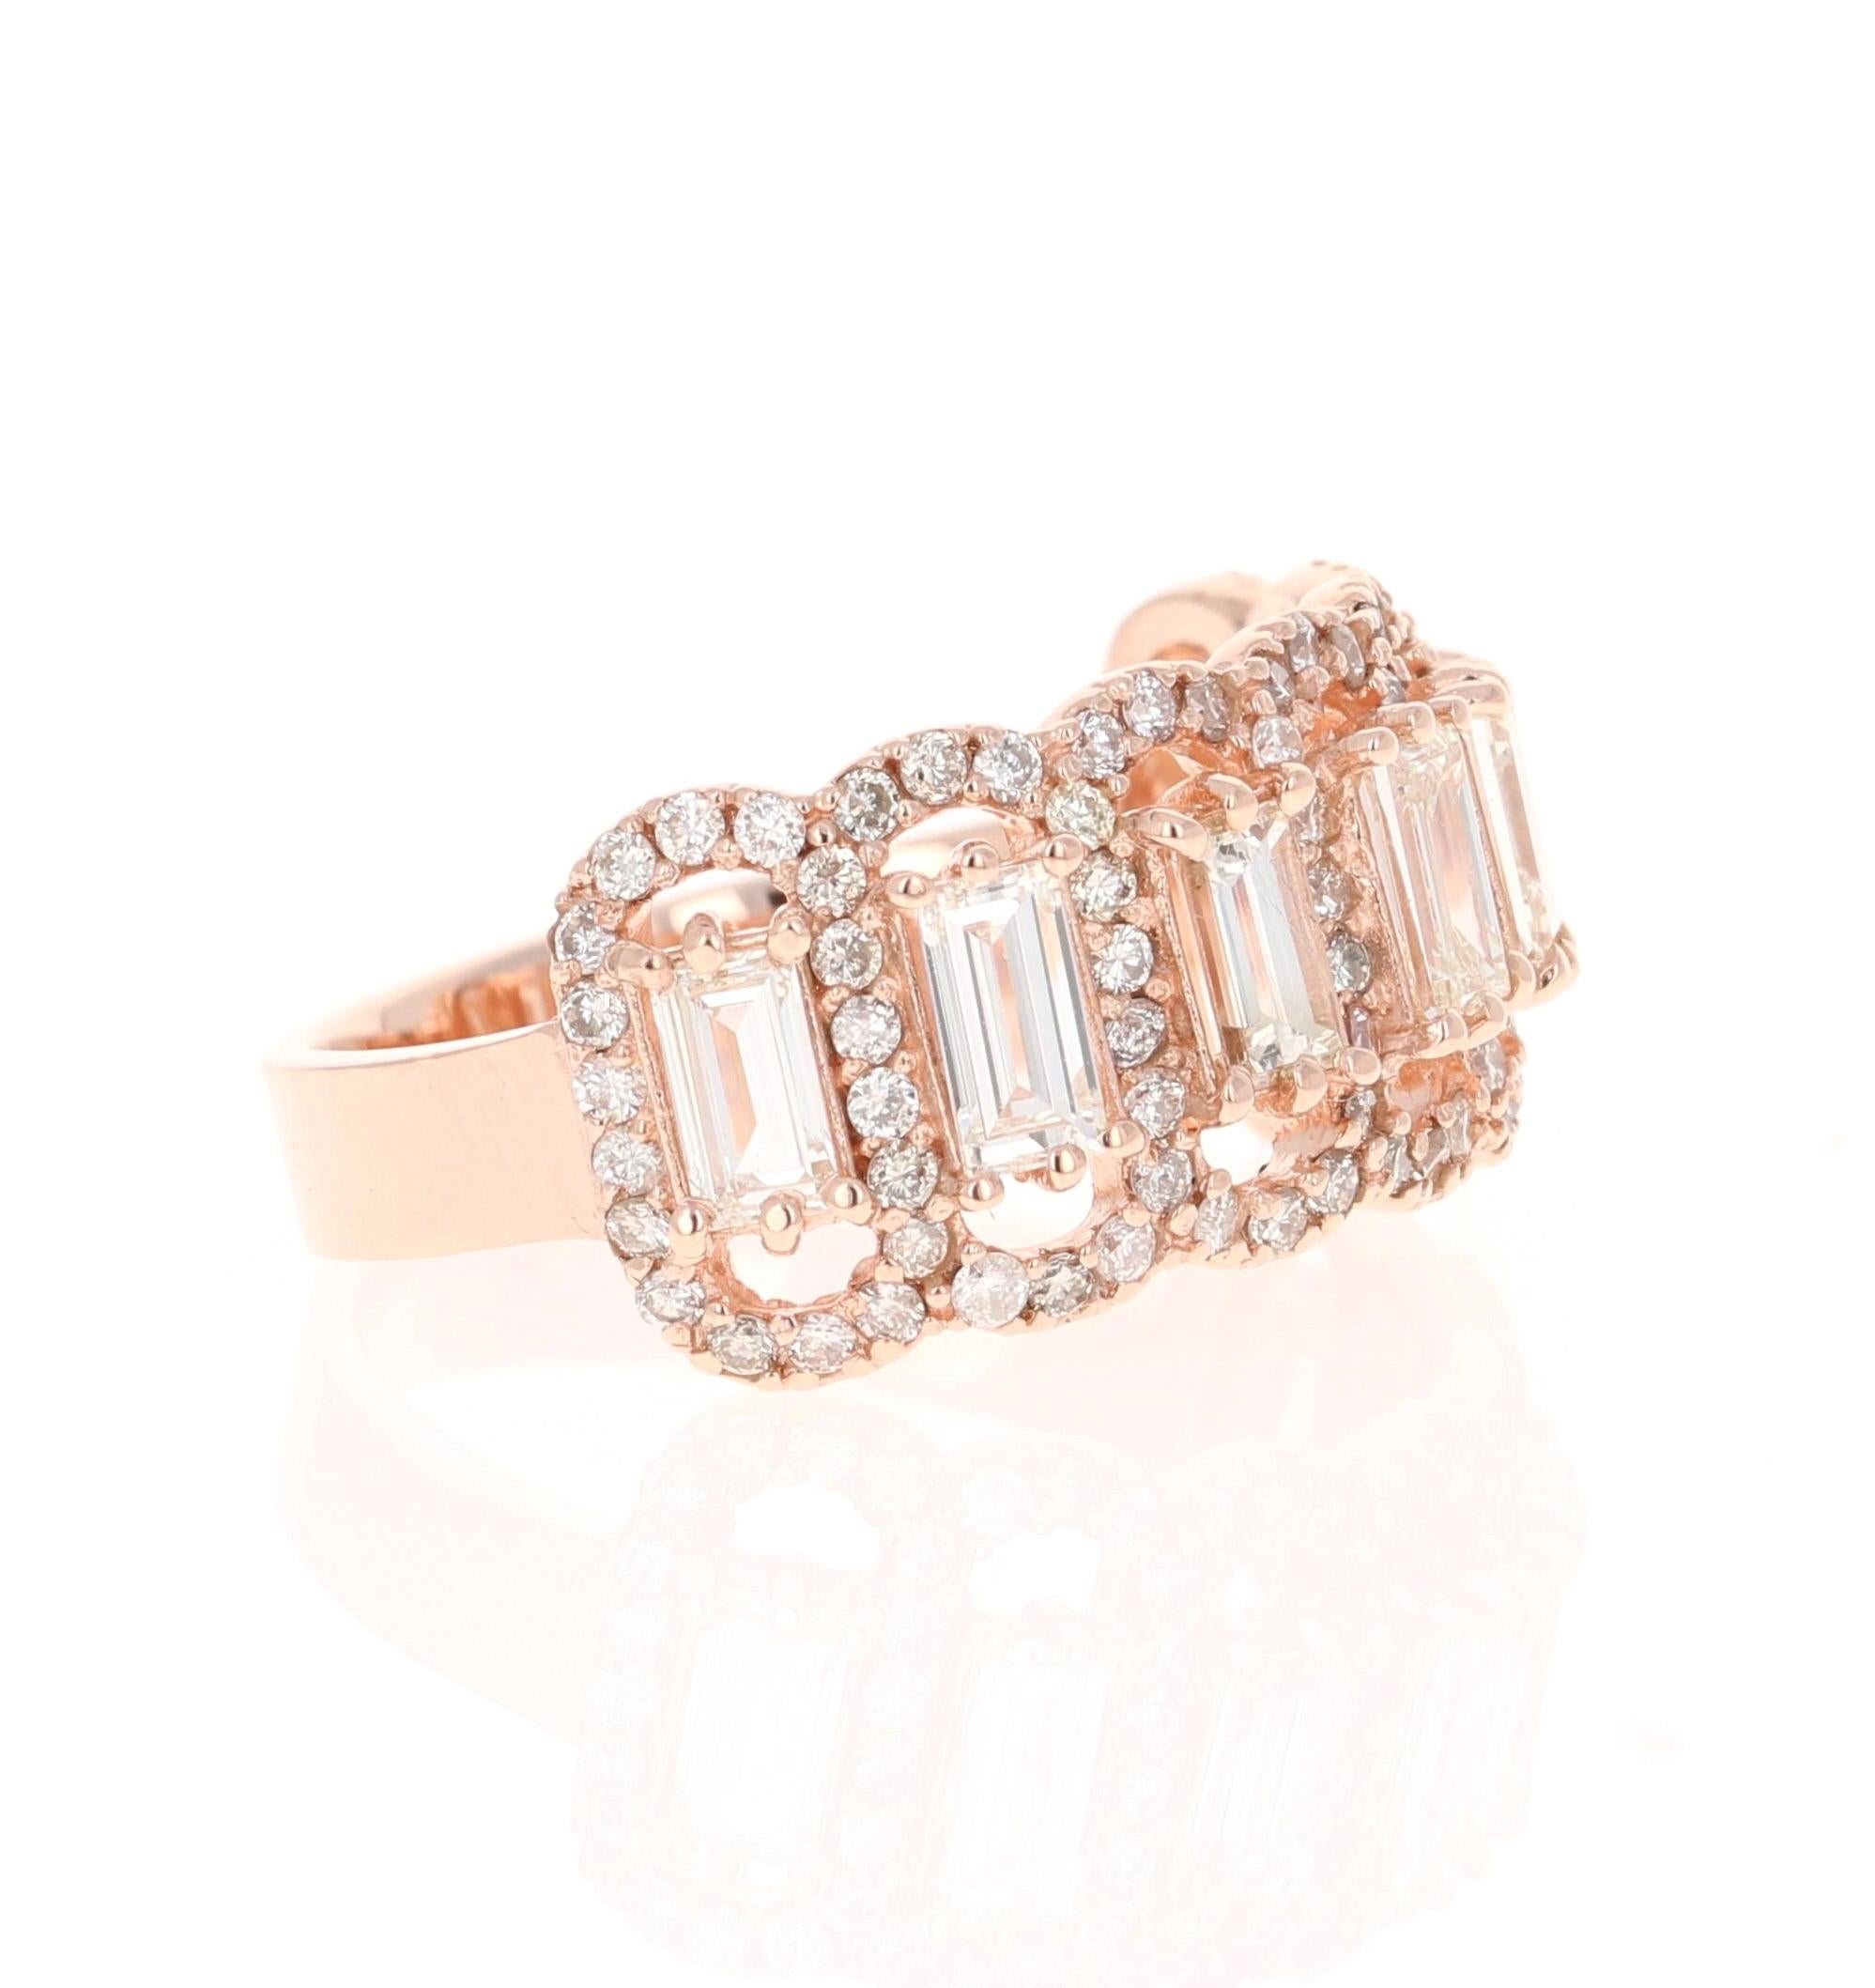 This ring has 7 straight Baguette Cut Diamonds that weigh 1.27 Carats and is embellished with 96 Round Cut Diamonds that weigh 0.70 Carats.  The clarity and color of the diamonds are VS-H.

Crafted in 14 Karat Rose Gold and weighs approximately 5.5